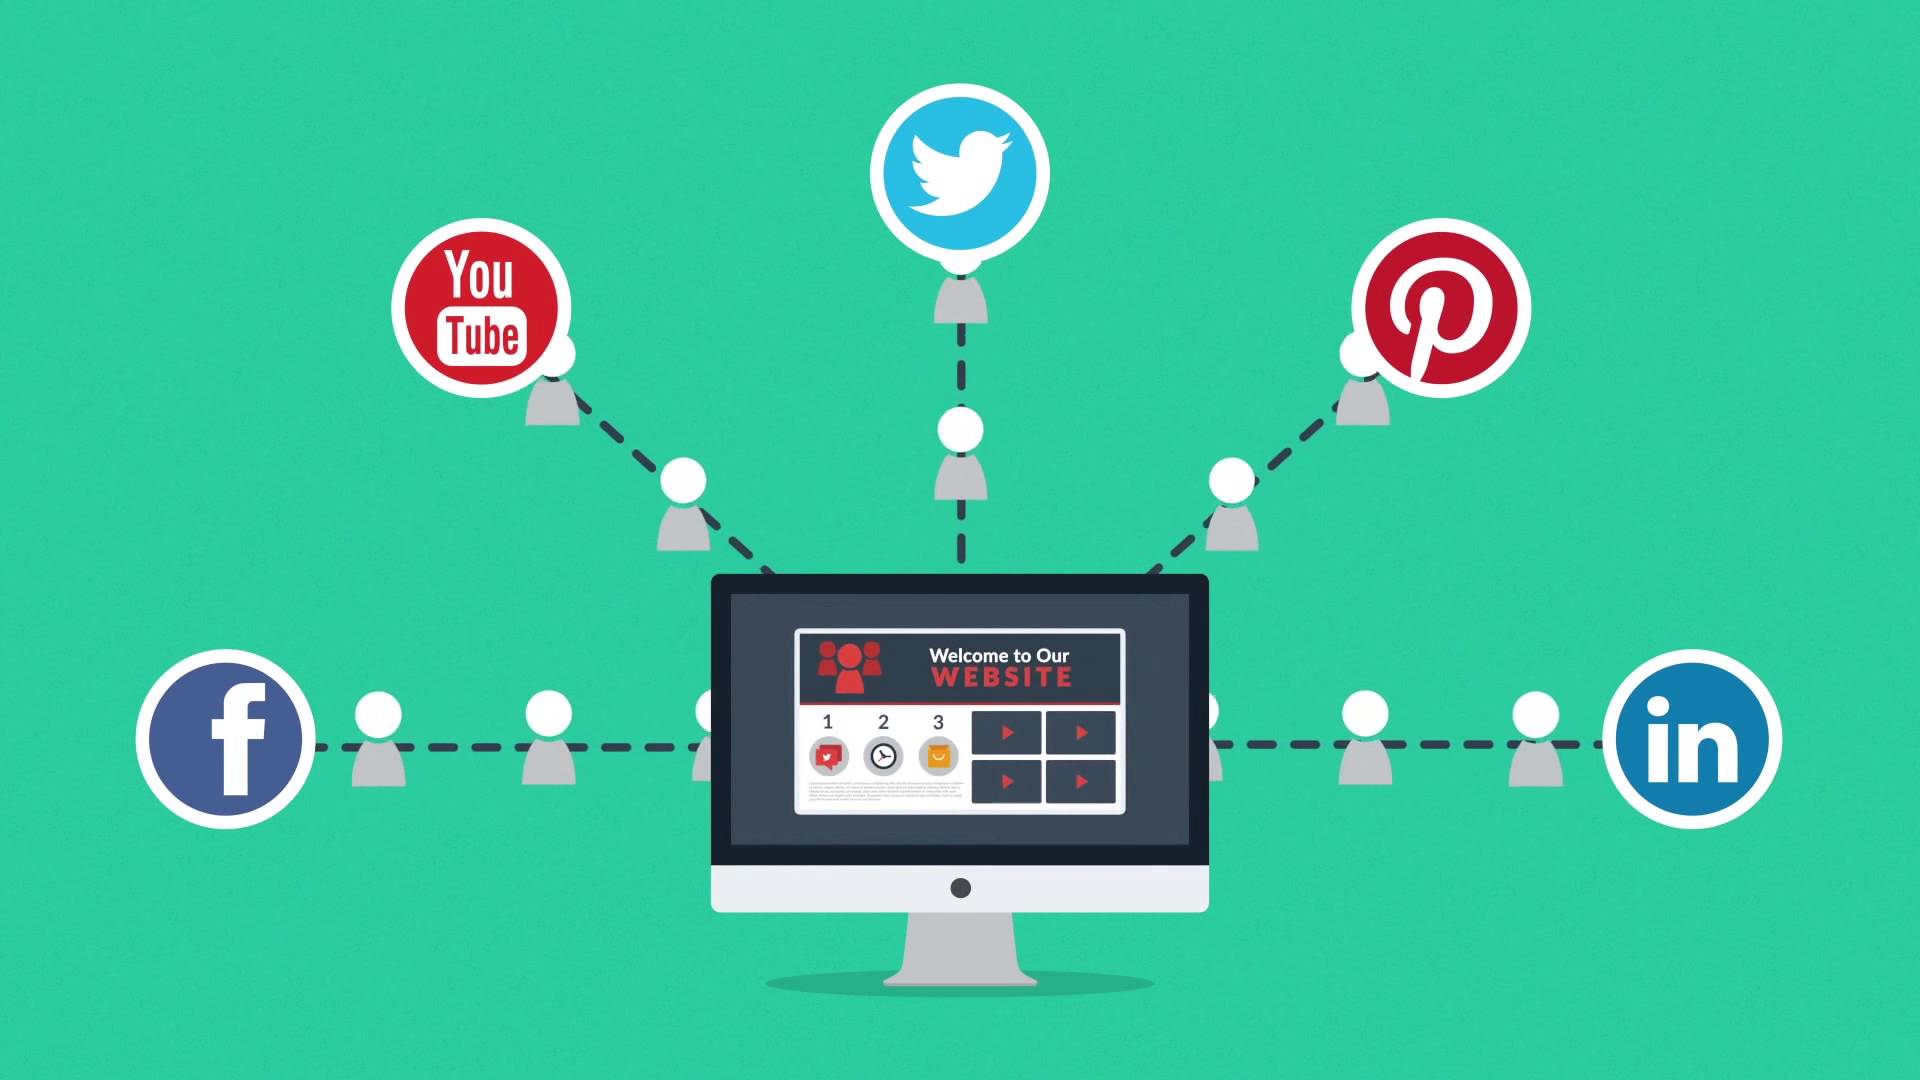 Improve Your Website Traffic With Social Media